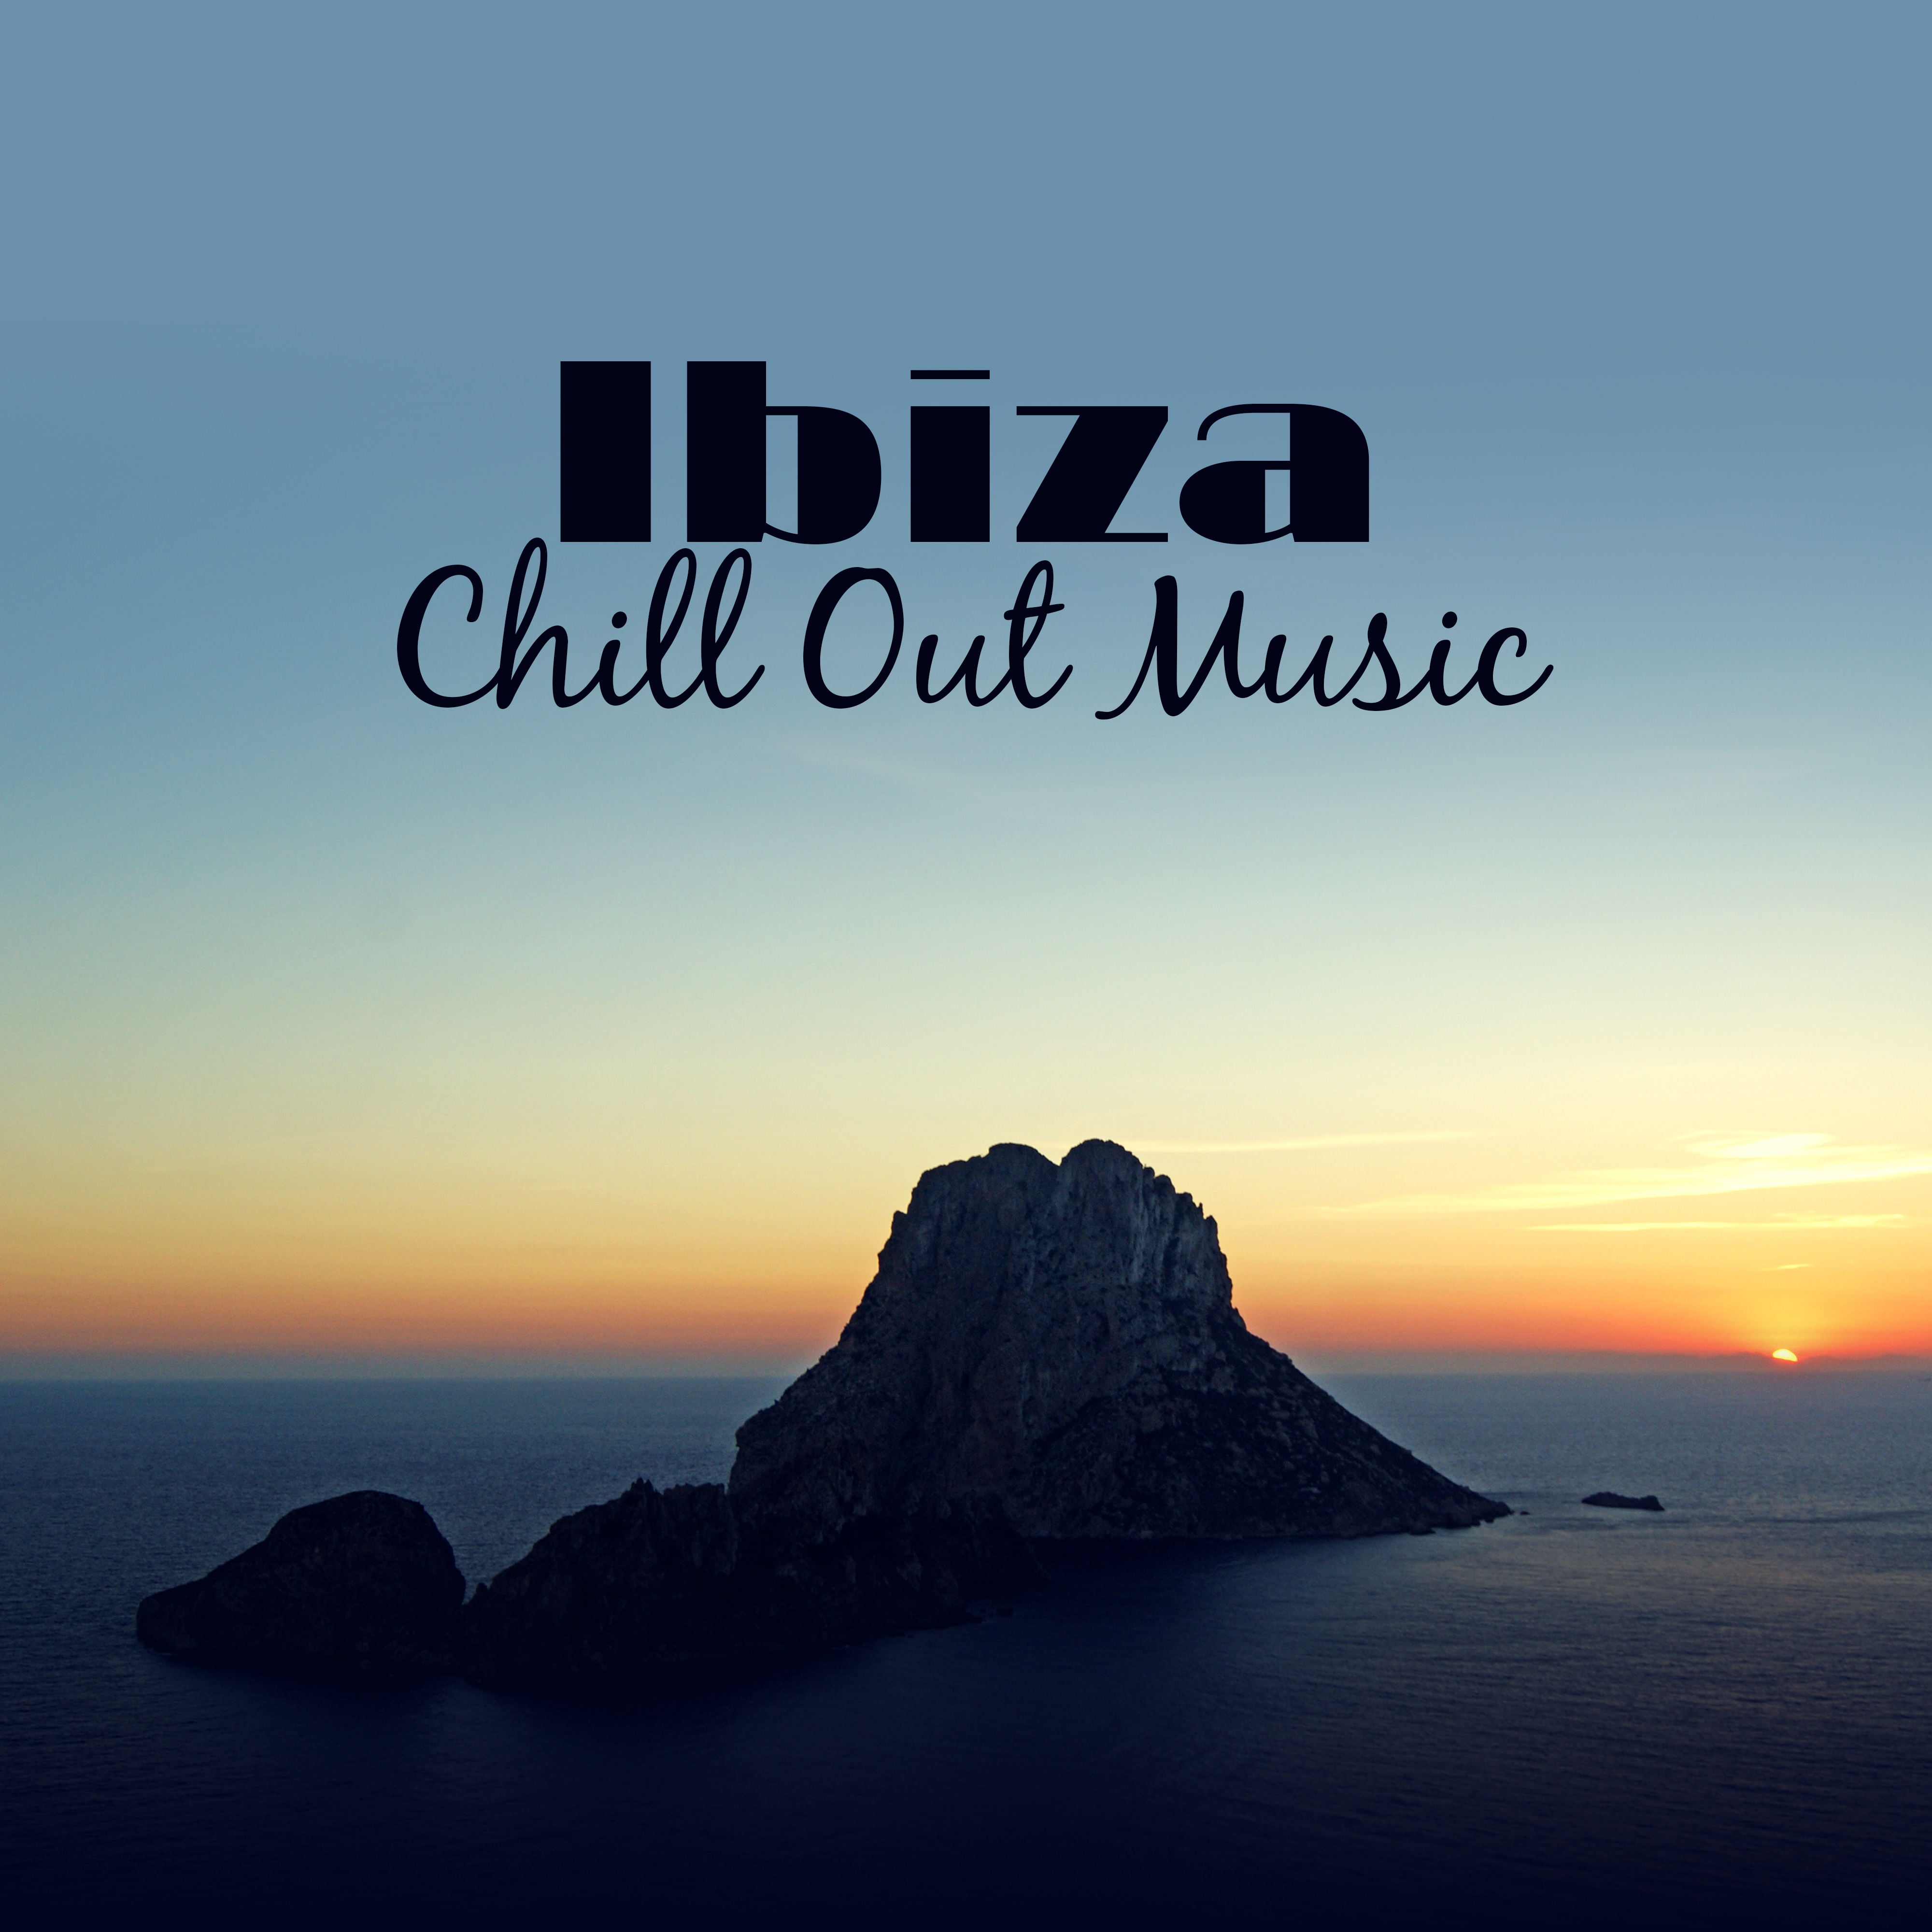 Ibiza Chill Out Music – Chill Out 2017, Music to Have Fun, Beach Party Sounds